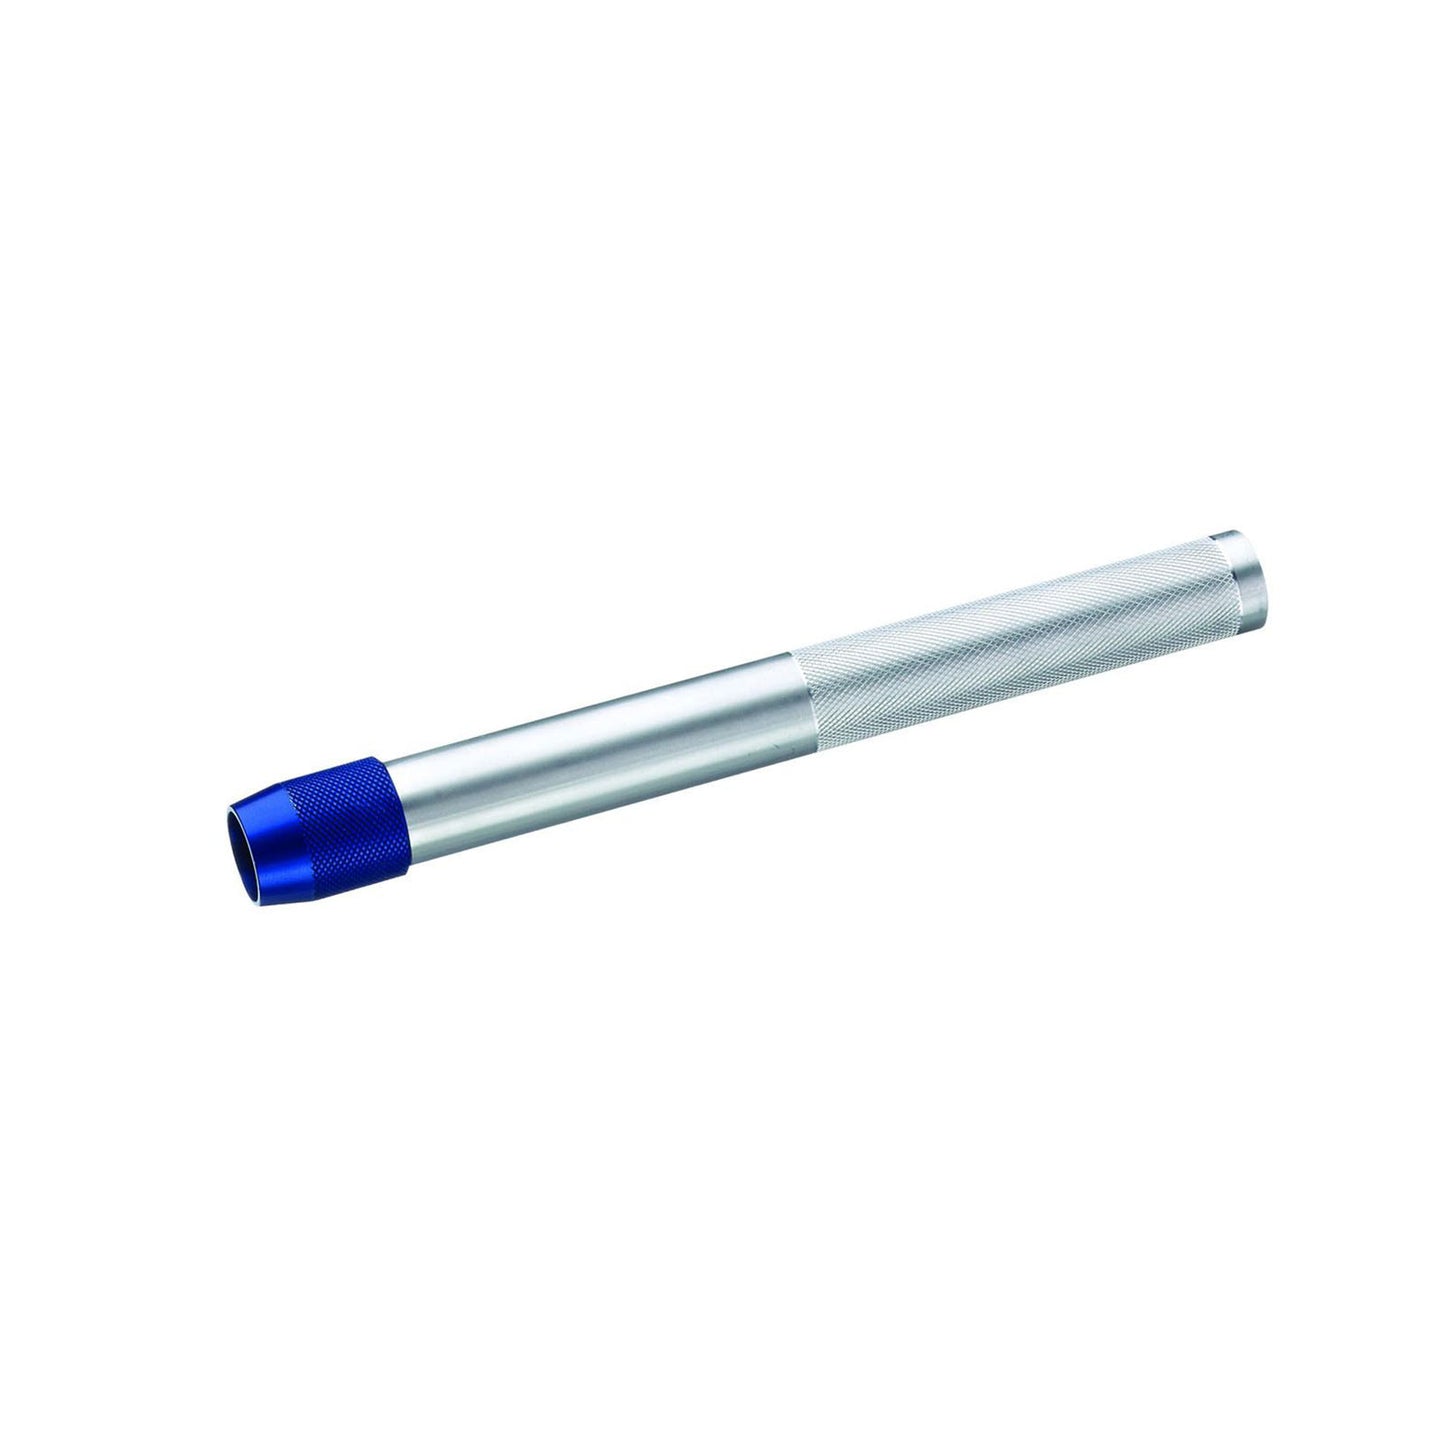 GEDORE 8577-350 - ALU tube 350mm for DREMO A-CD (2880164)